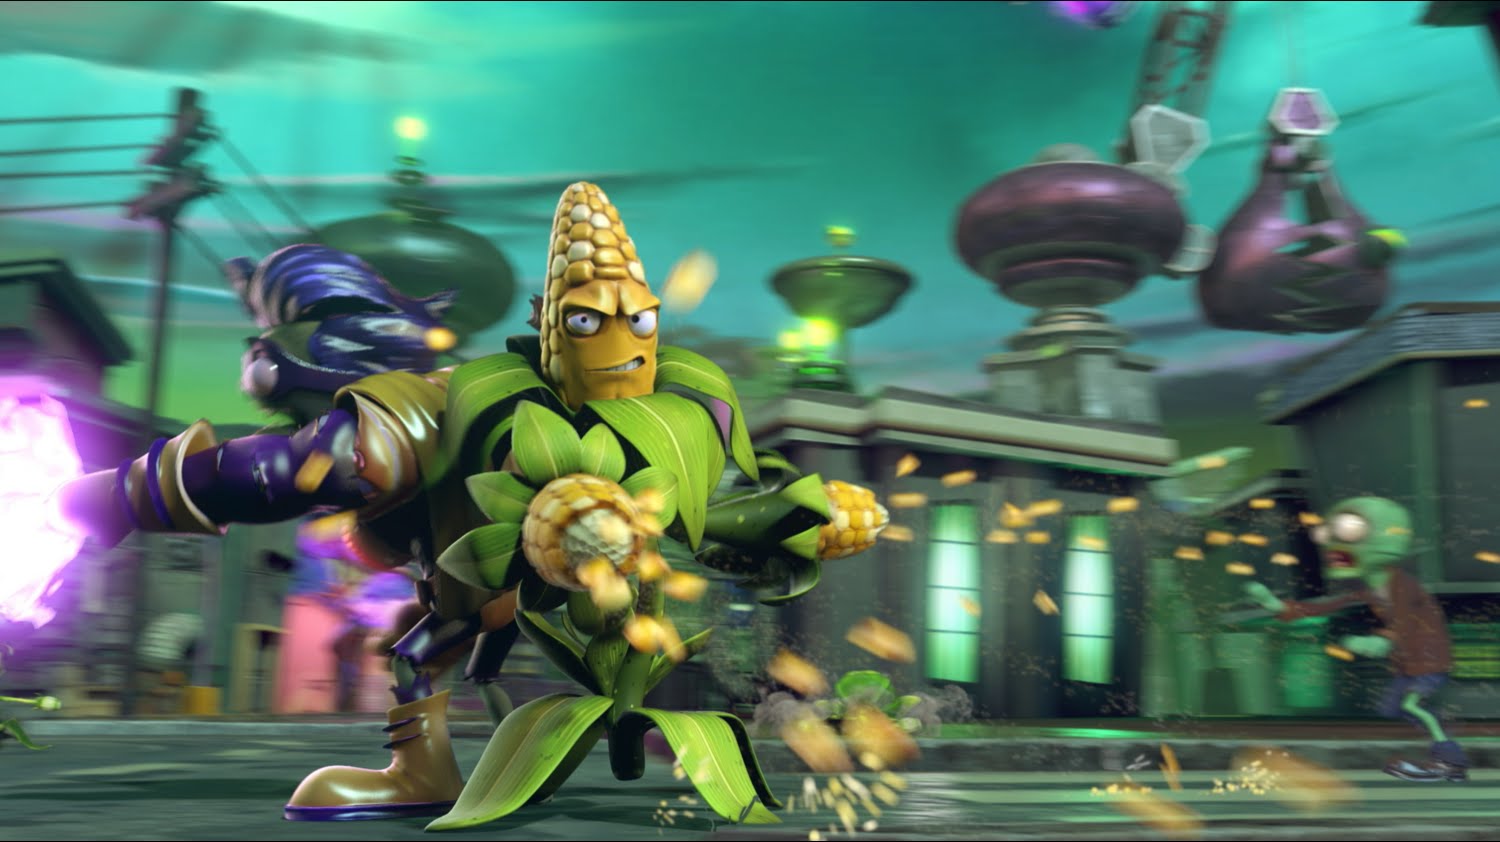 Video For Plants vs. Zombies: Garden Warfare 2 Puts the Flowers on the Offensive